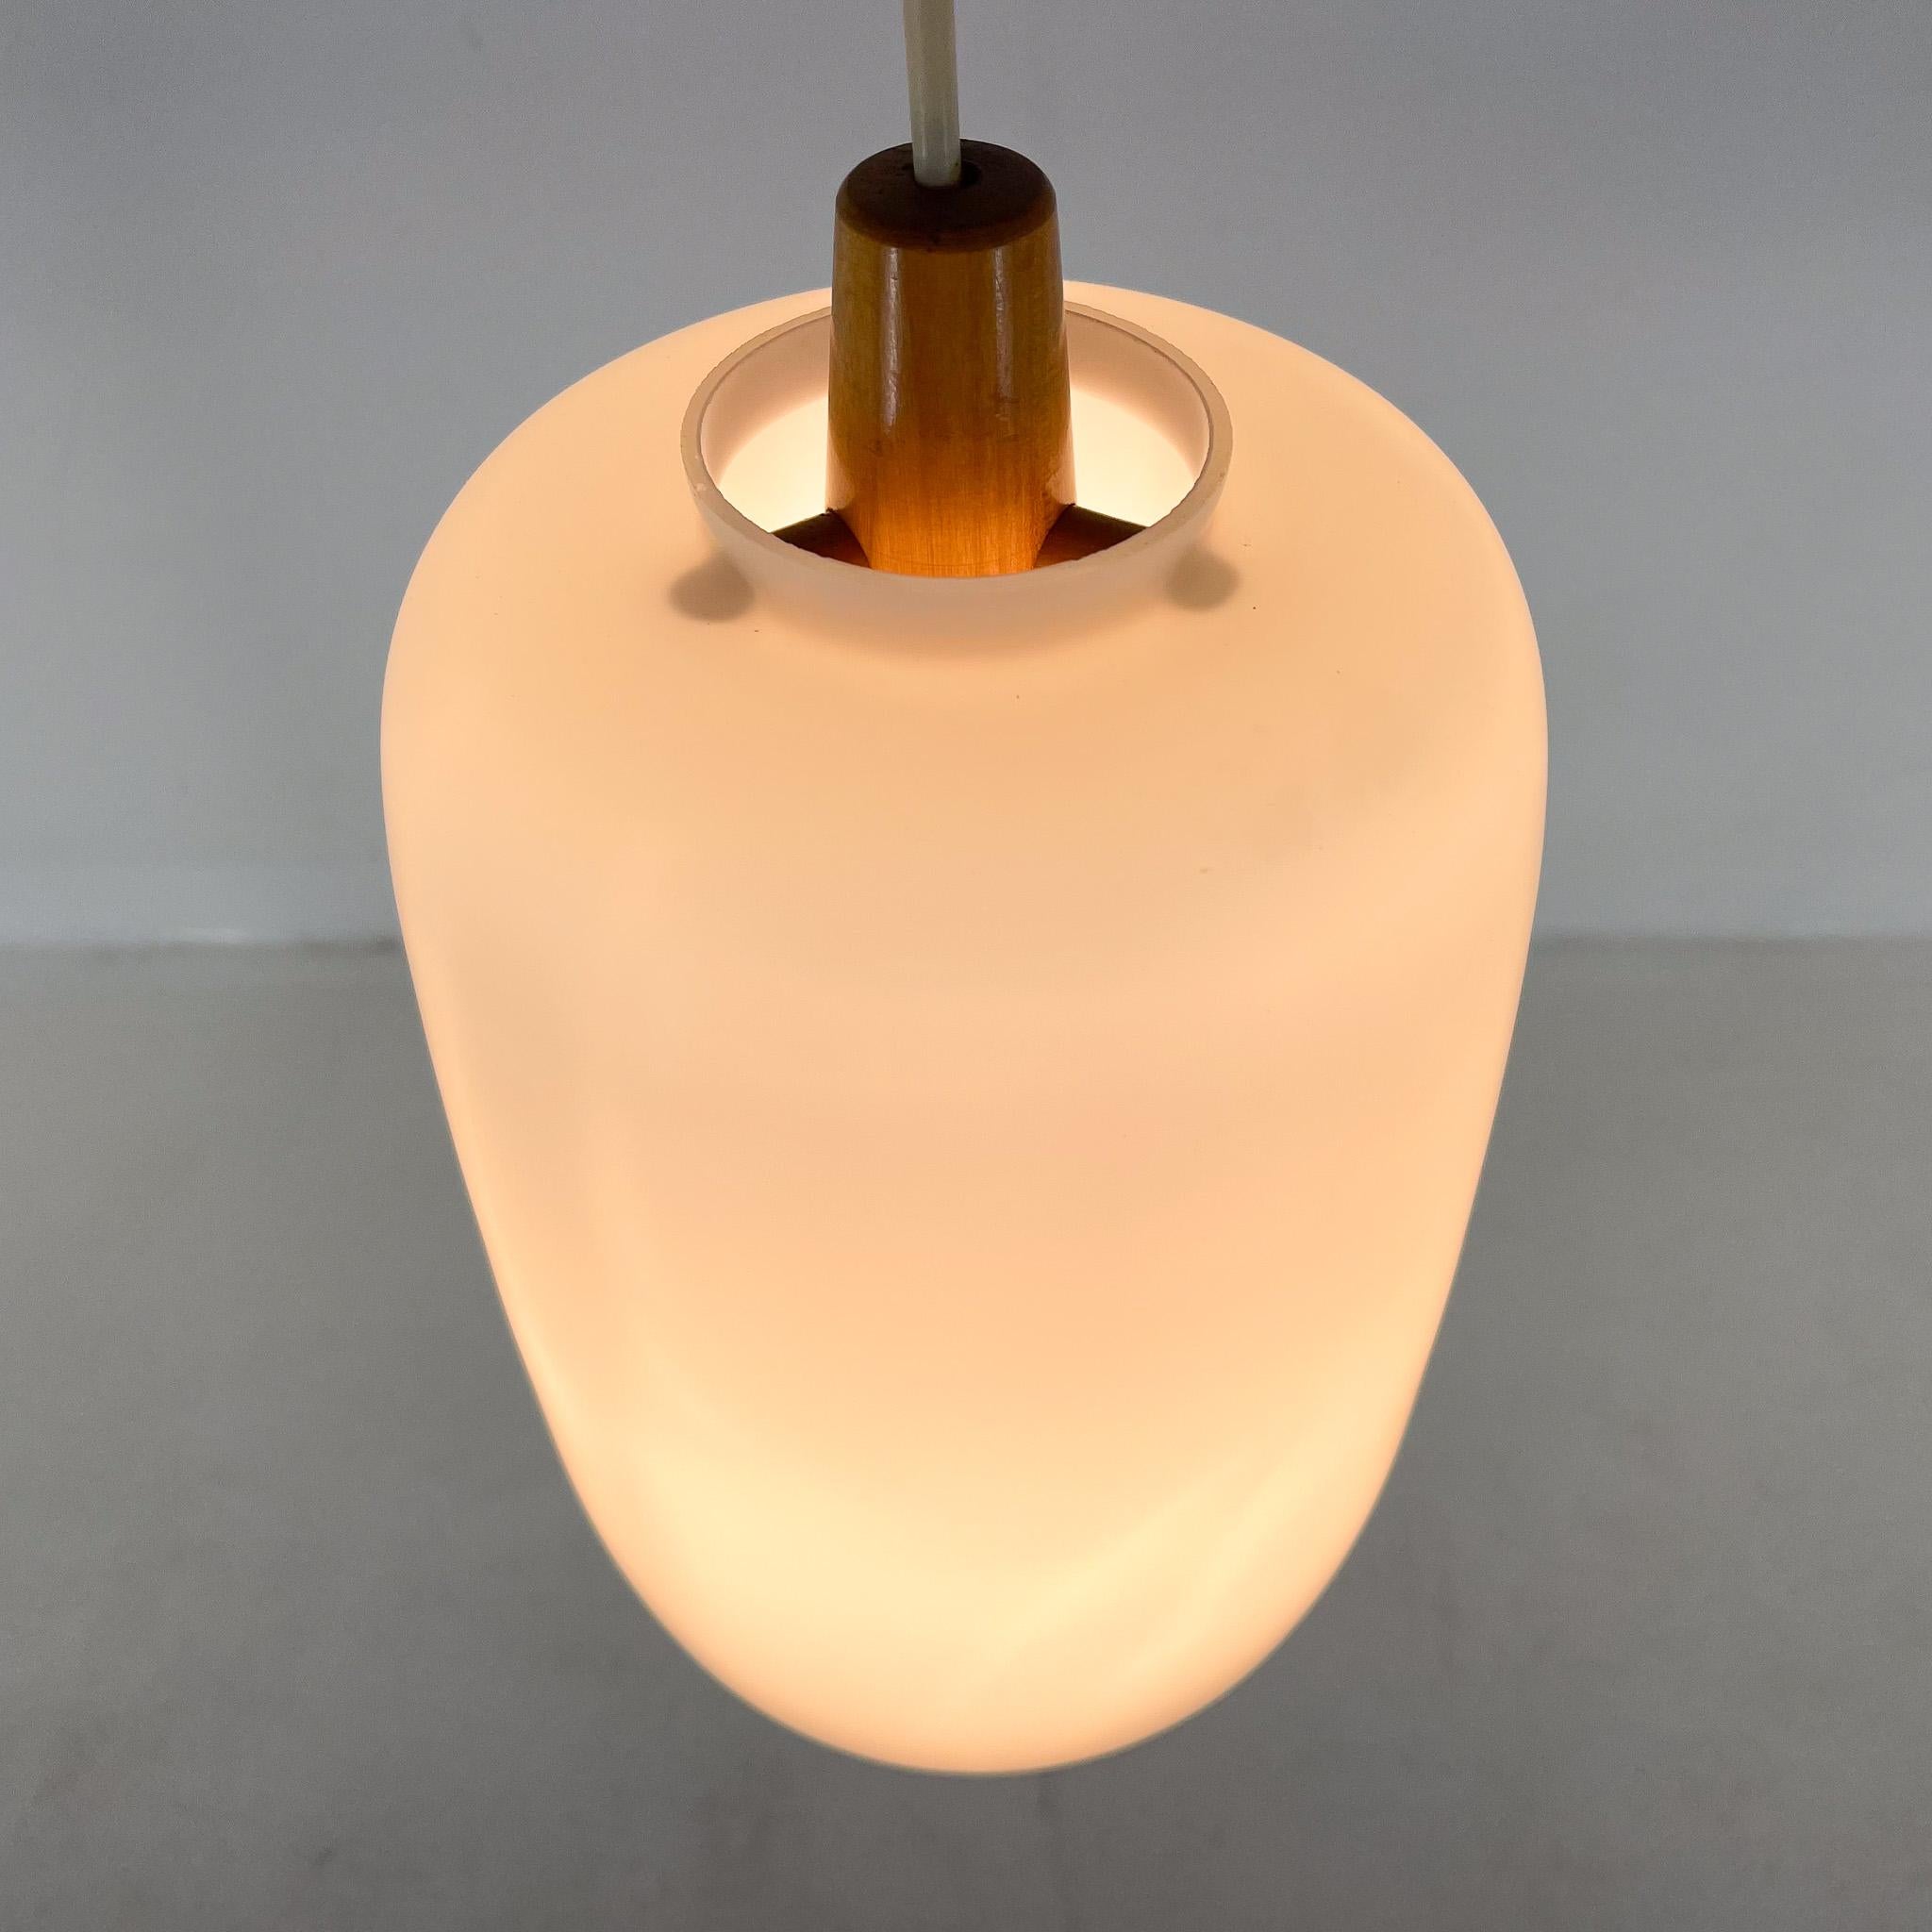 20th Century 1960s Wood and Glass Midcentury Pendant Light by ULUV, Czechoslovakia For Sale